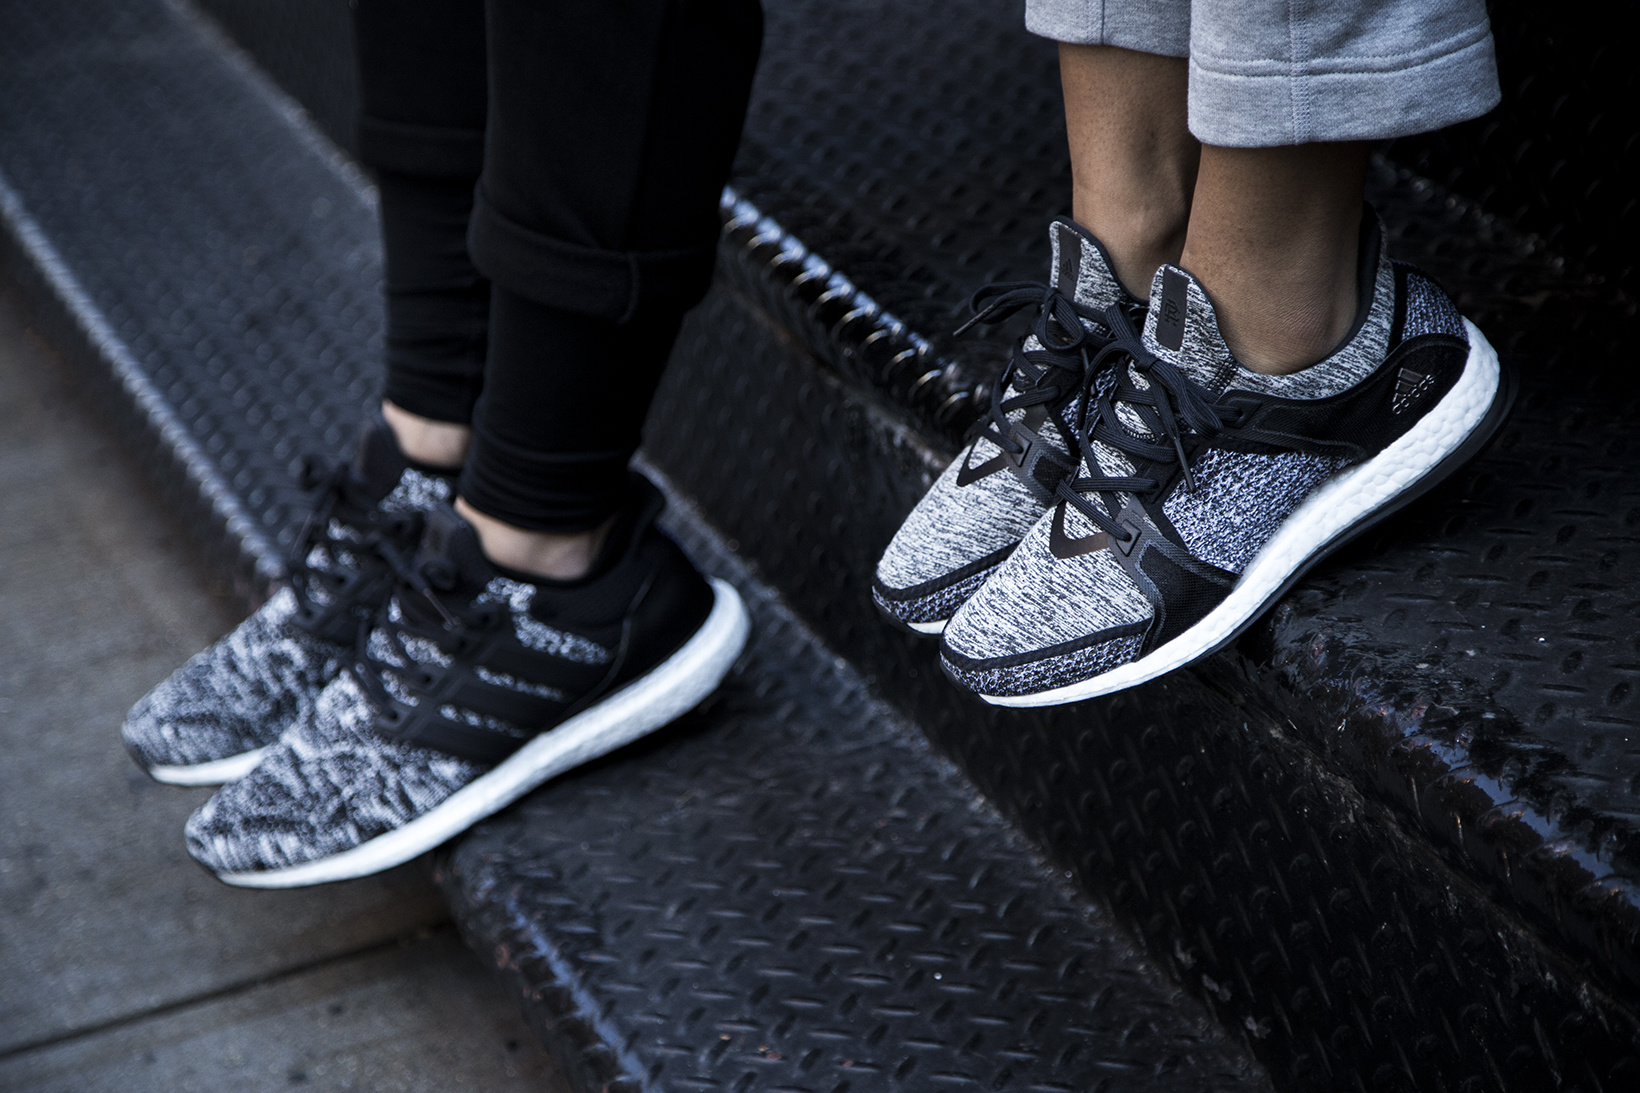 adidas x reigning champ pureboost shoes